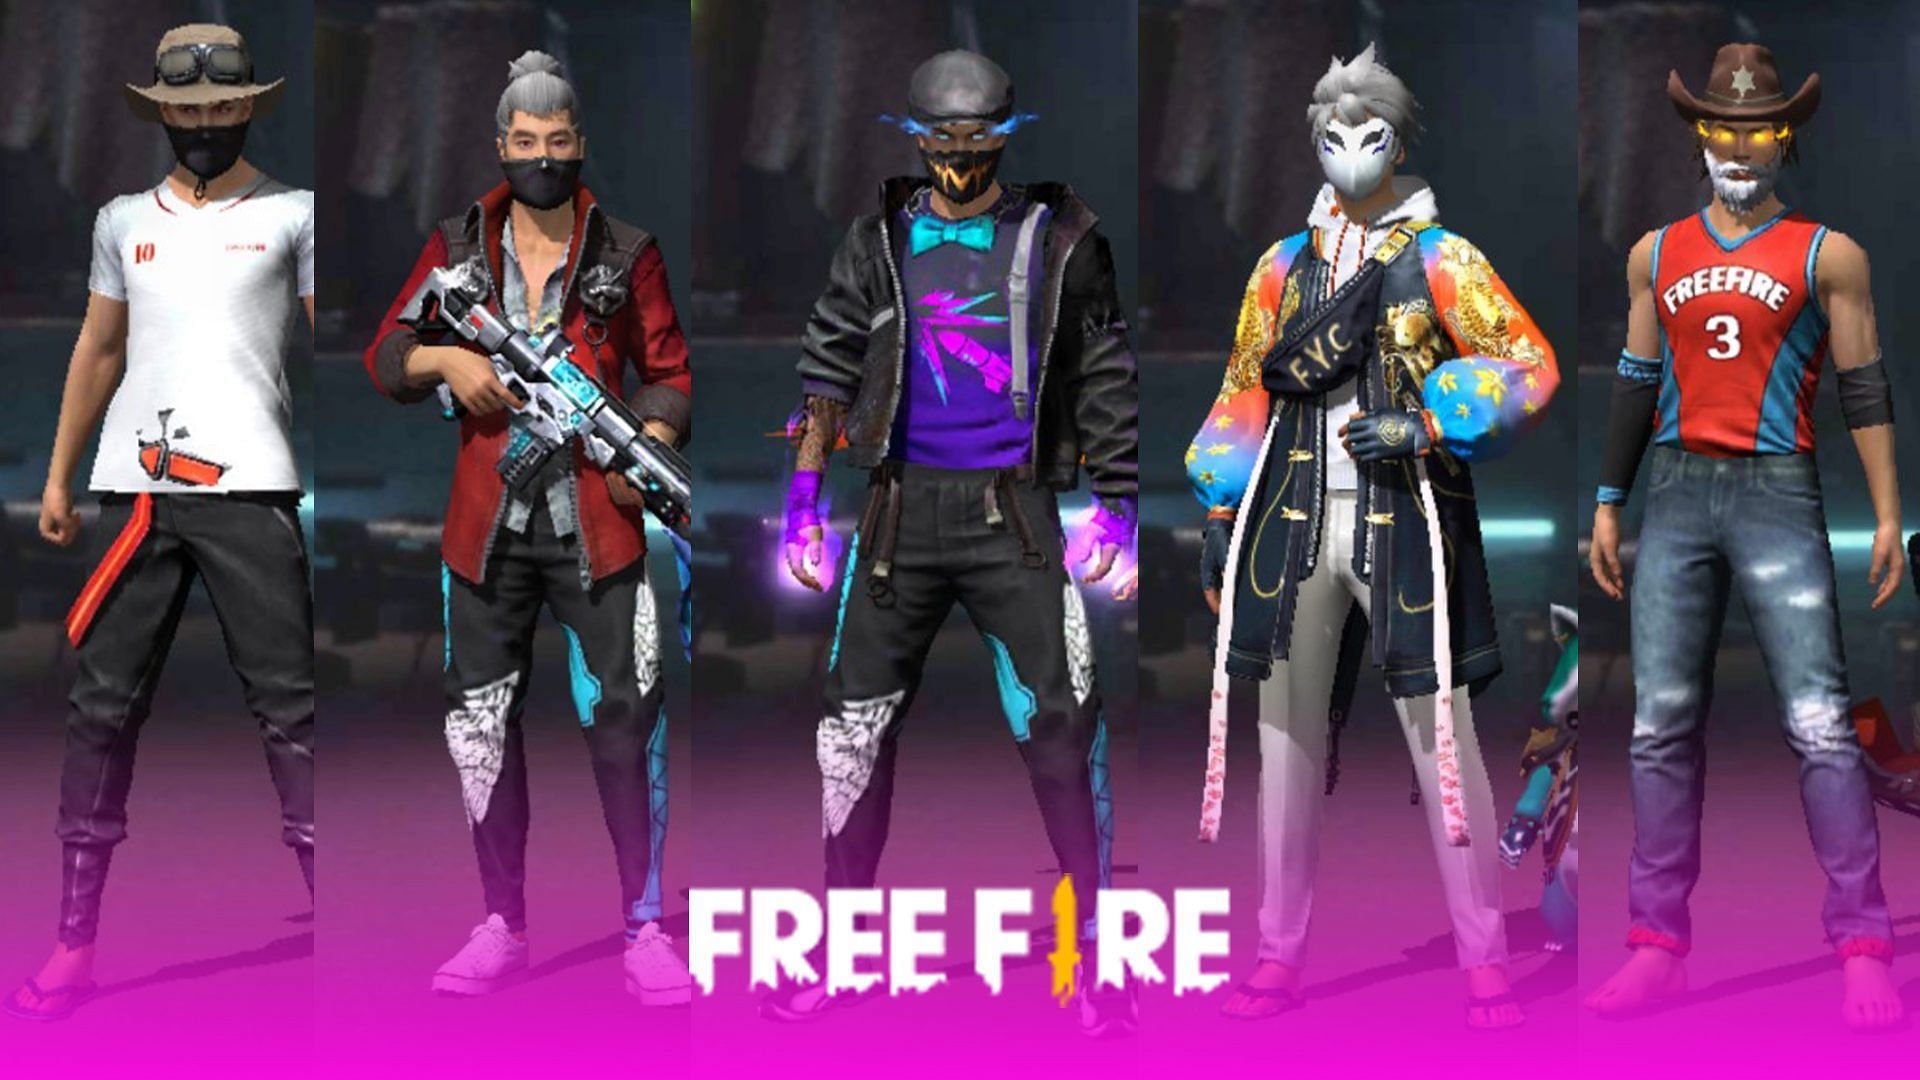 These Free Fire YouTubers are renowned for their pro gameplay (Image via Sportskeeda)